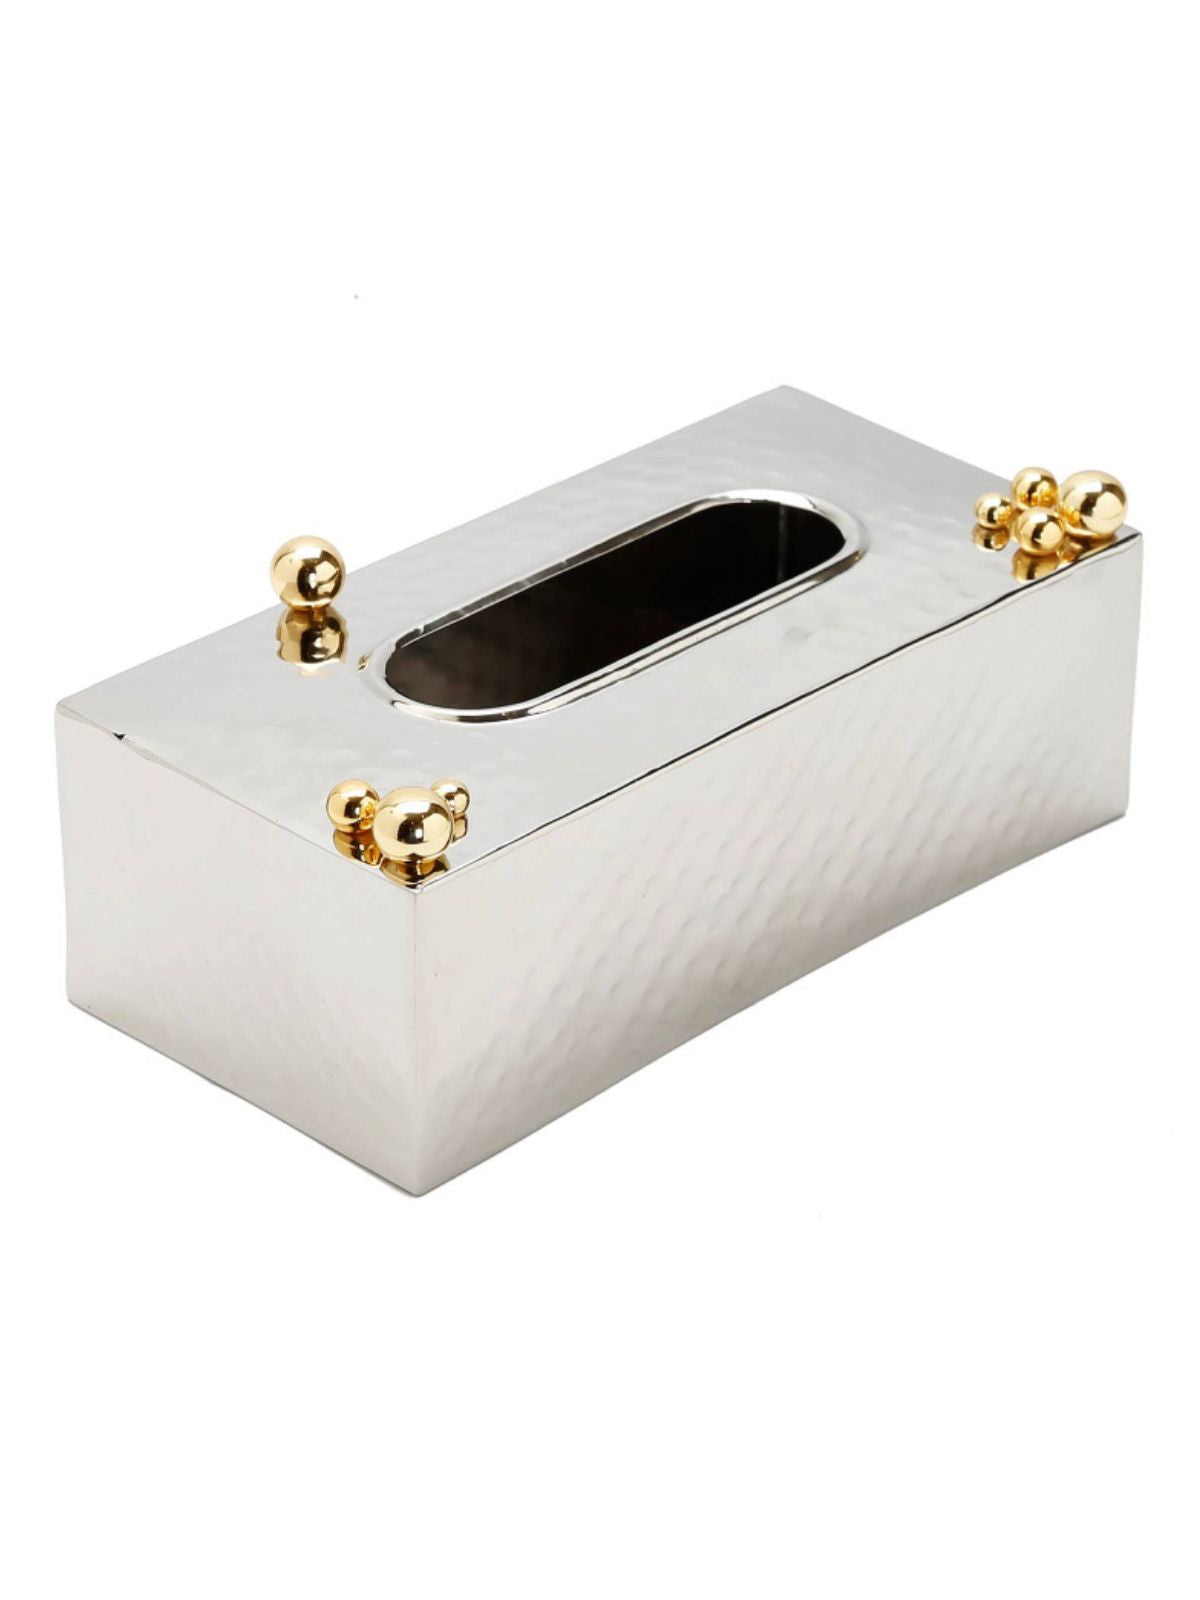 11L Luxury Silver Hammered Tissue Box with Gold Ball Design - KYA Home Decor